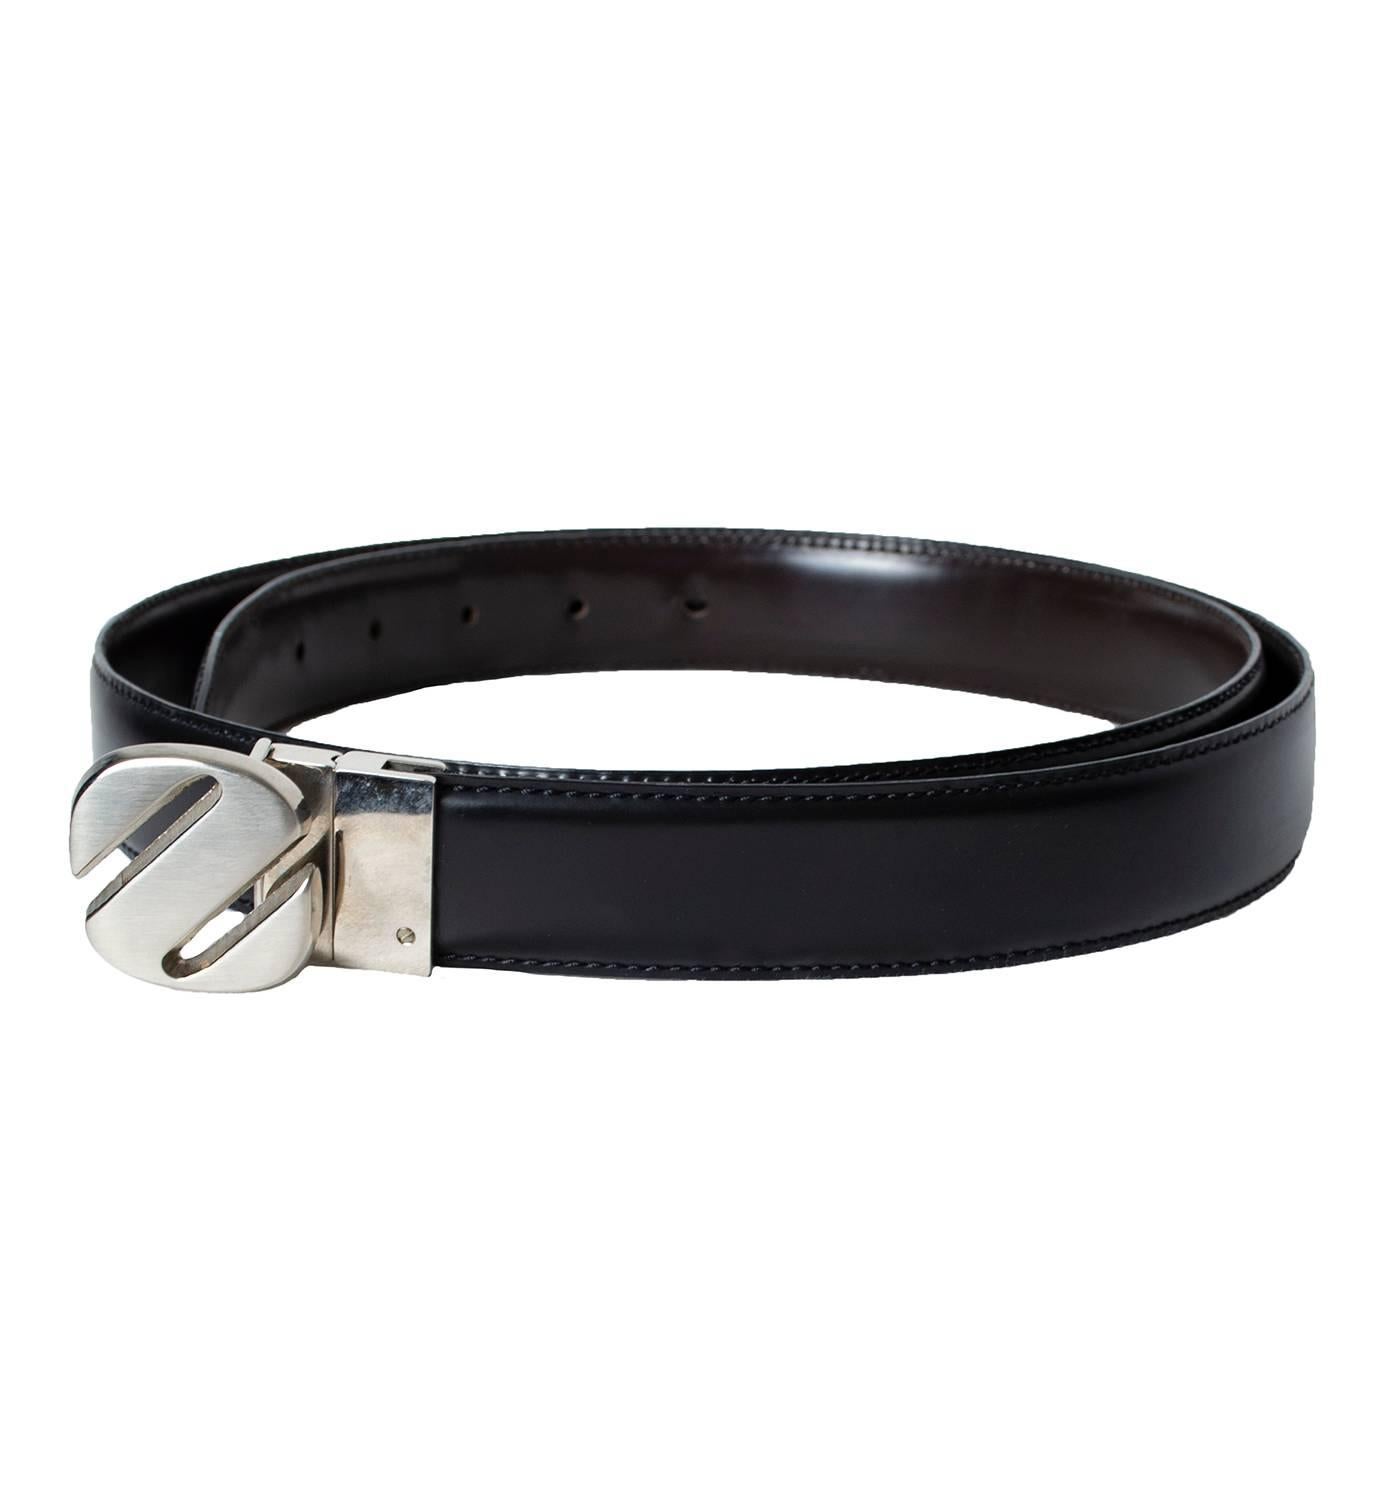 An elegant, polished and perfectly-minimalist belt that reverses from ebony black to deep chocolate brown. The beautiful figural “Z” buckle is brushed silver so it’s not too flashy, but its impressive weight reminds you of its quality.

Reversible